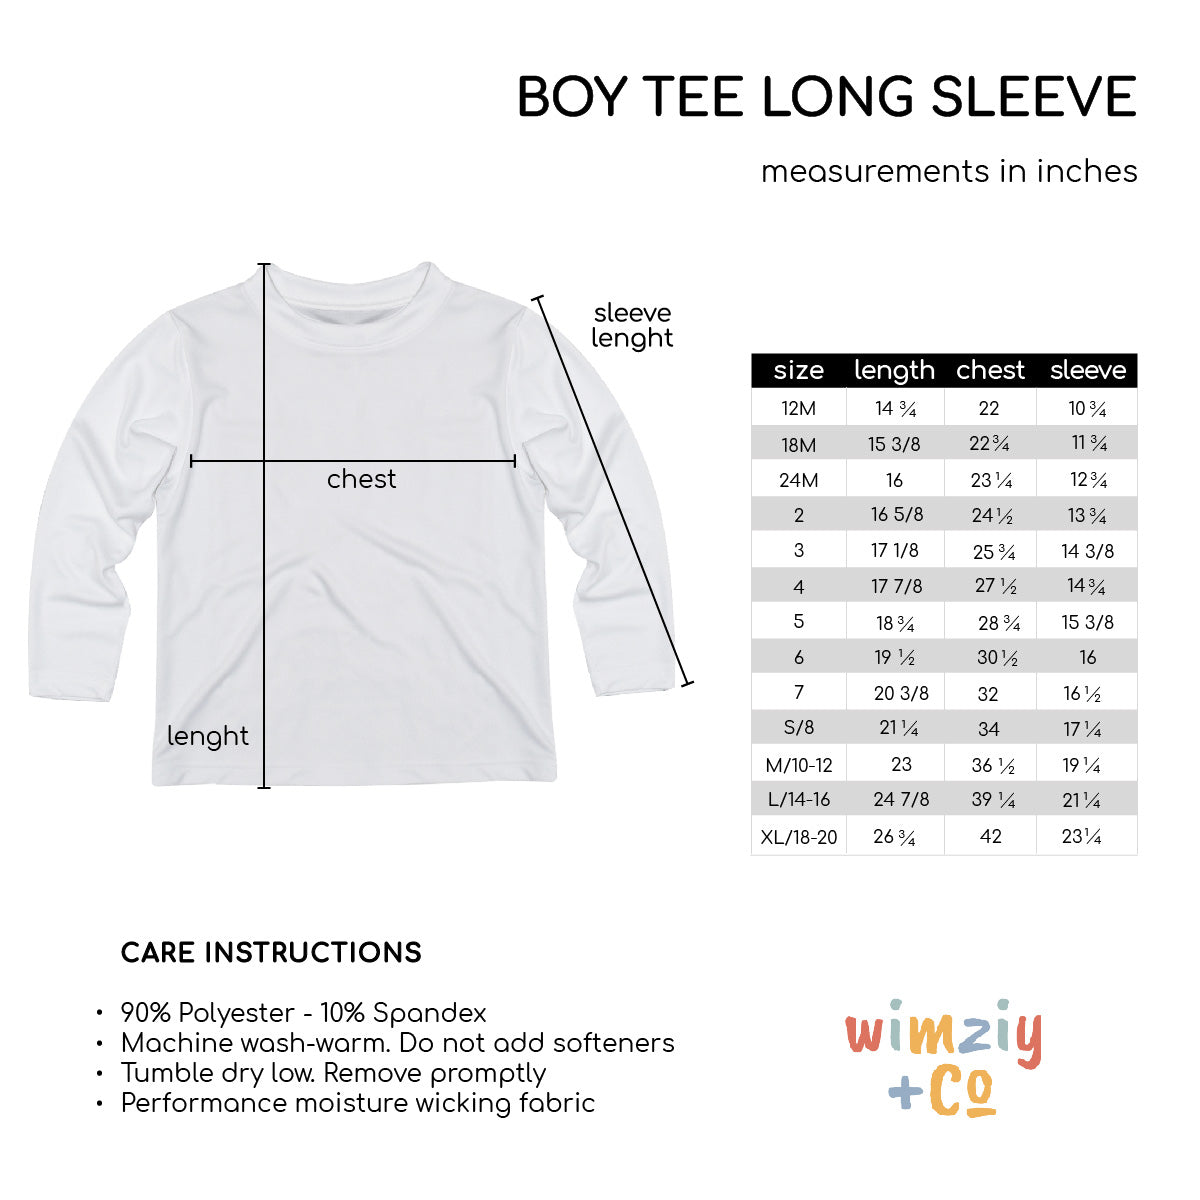 Ready To Crush Your Grade Personalized Long Sleeve Tee Shirt - Wimziy&Co.